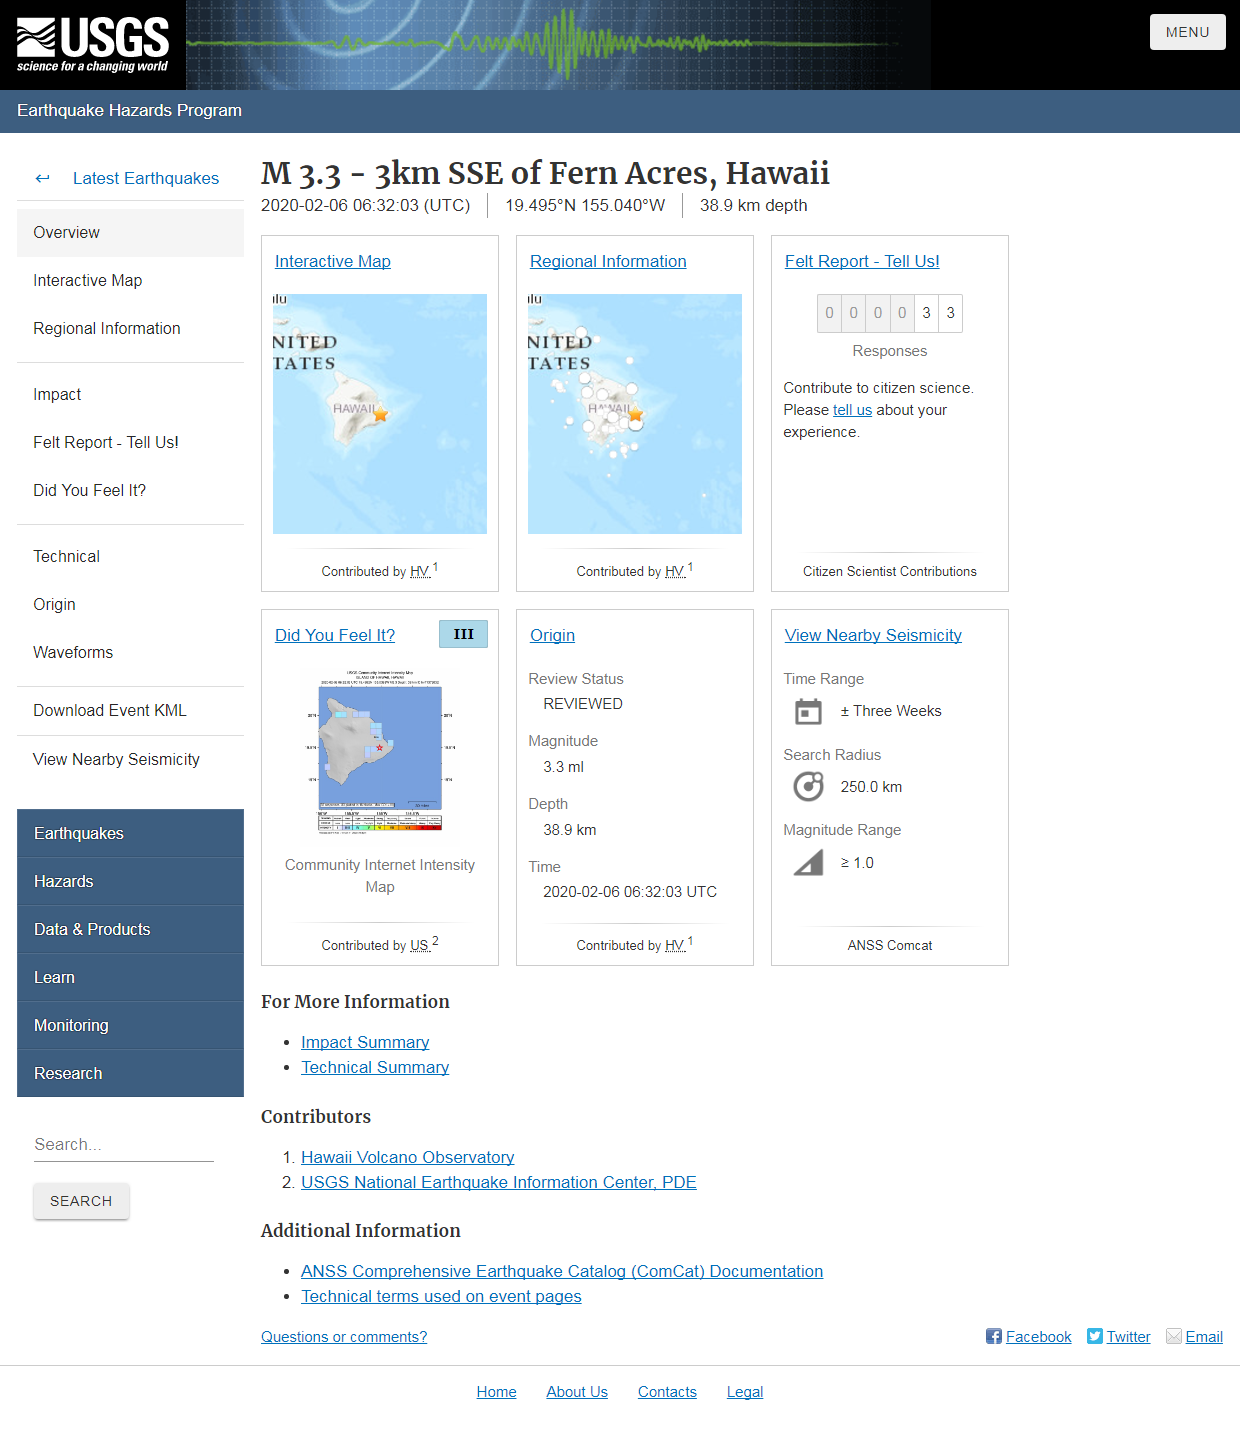 M 3.3 - 3km SSE of Fern Acres, Hawaii.png